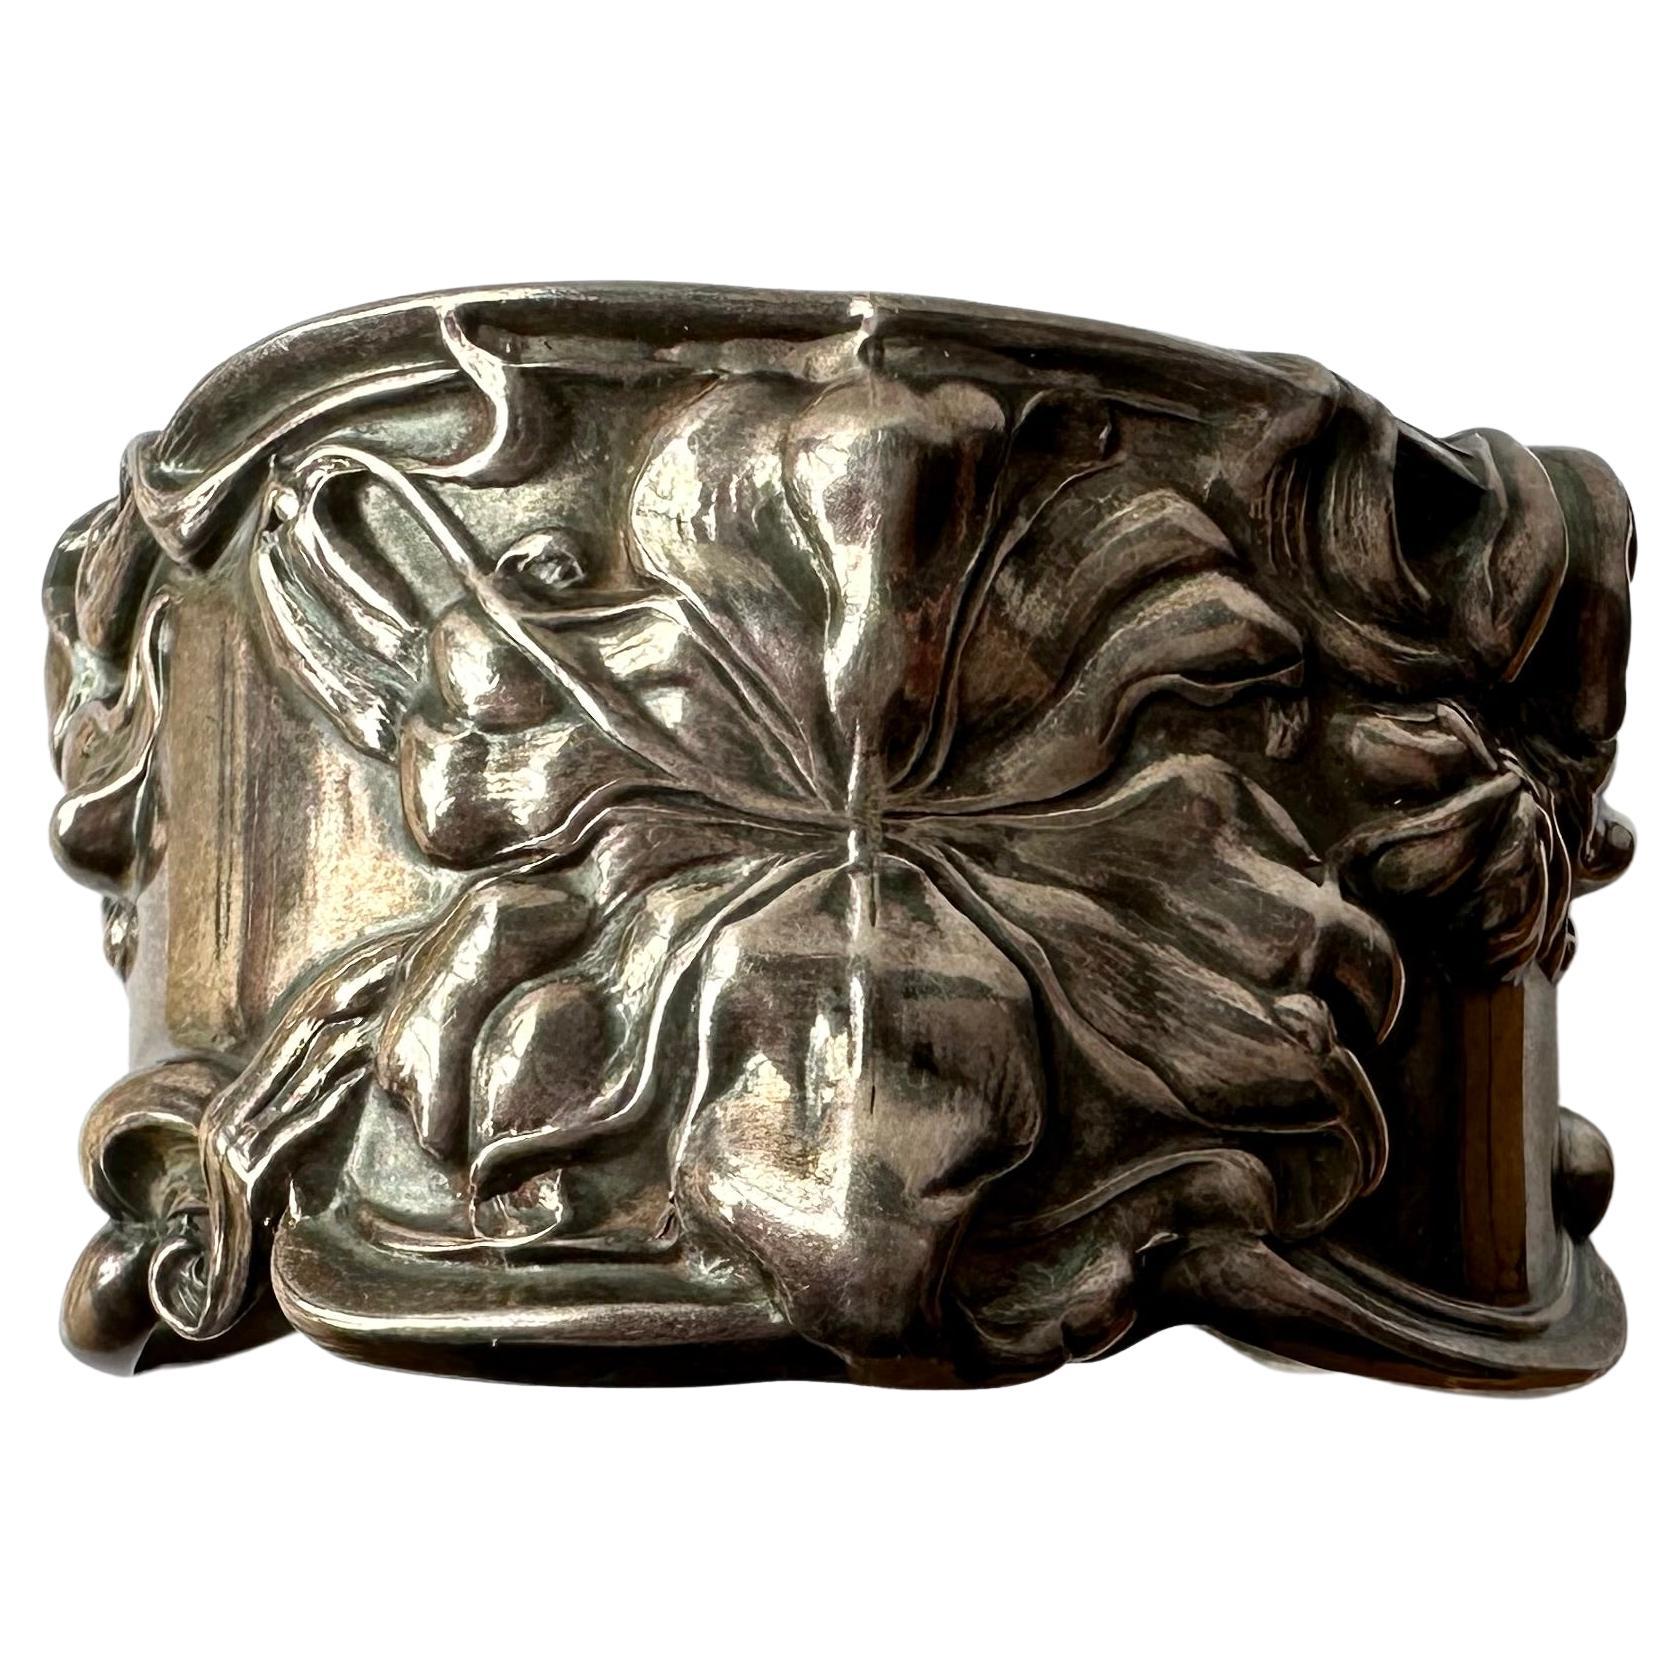 A Frank Whiting Iris Themed Silver Cuff Bracelet